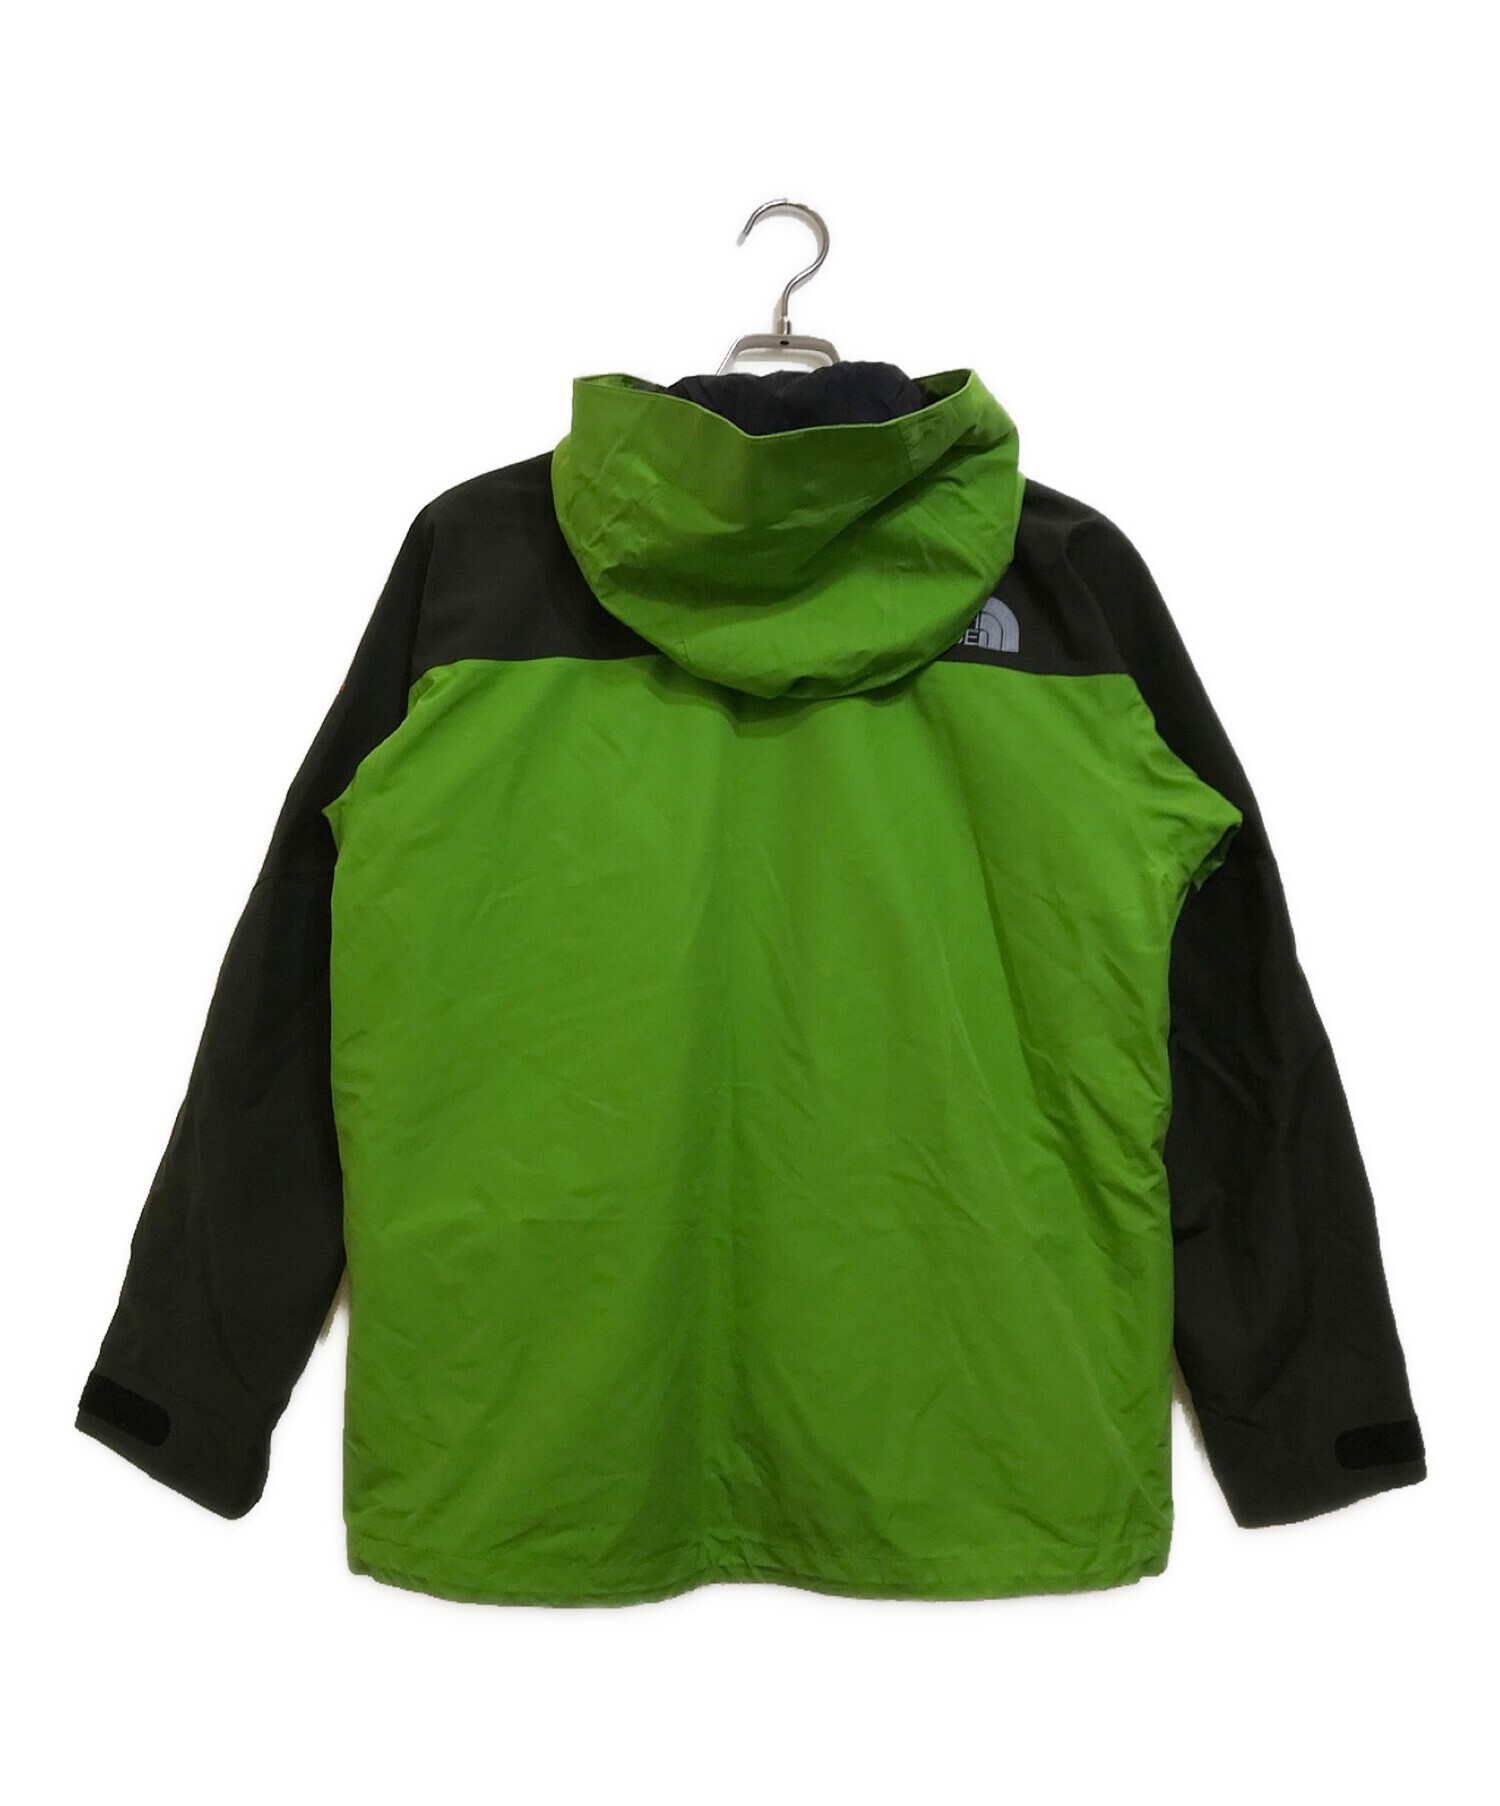 813070● THE NORTH FACE Mountain Jacket